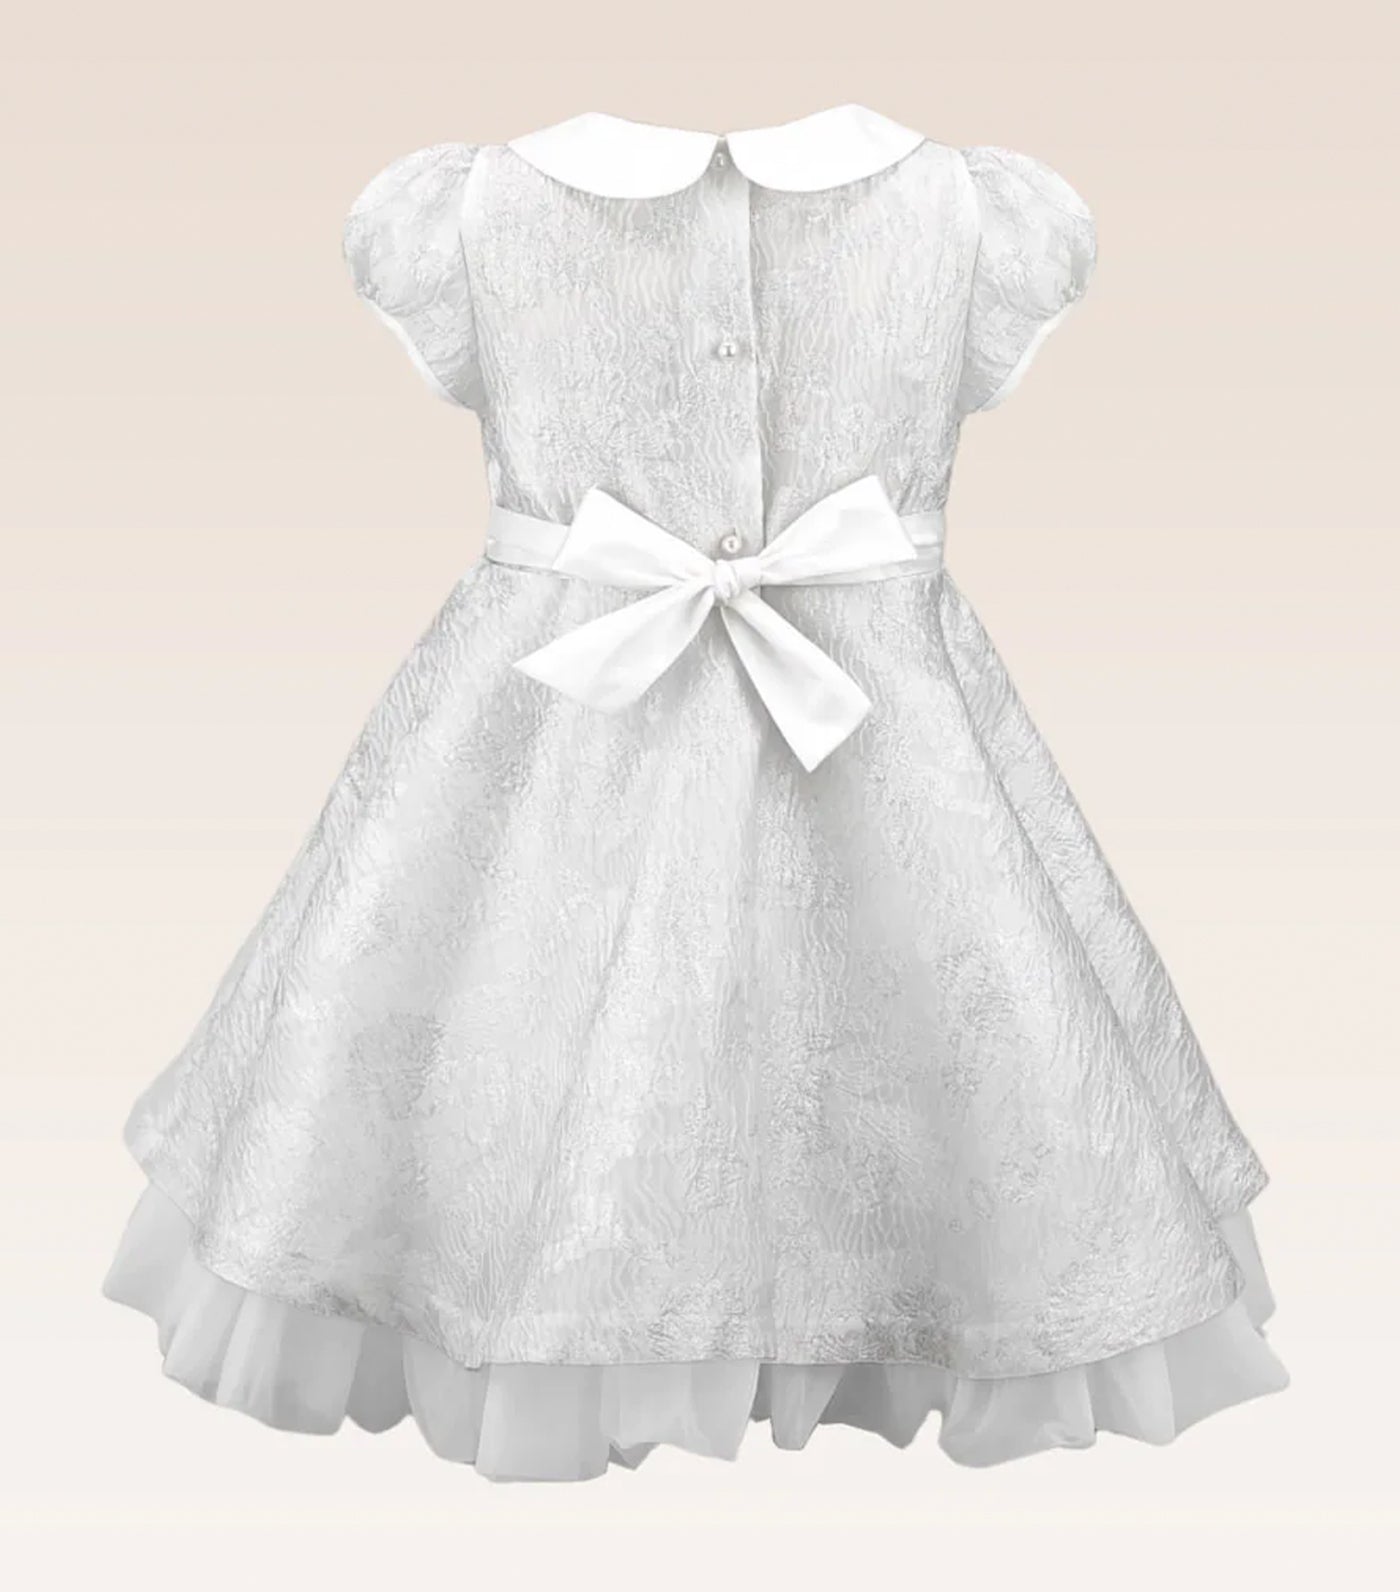 Georgette Girls Silver Jacquard Party Dress with Tulle Underlay Skirt